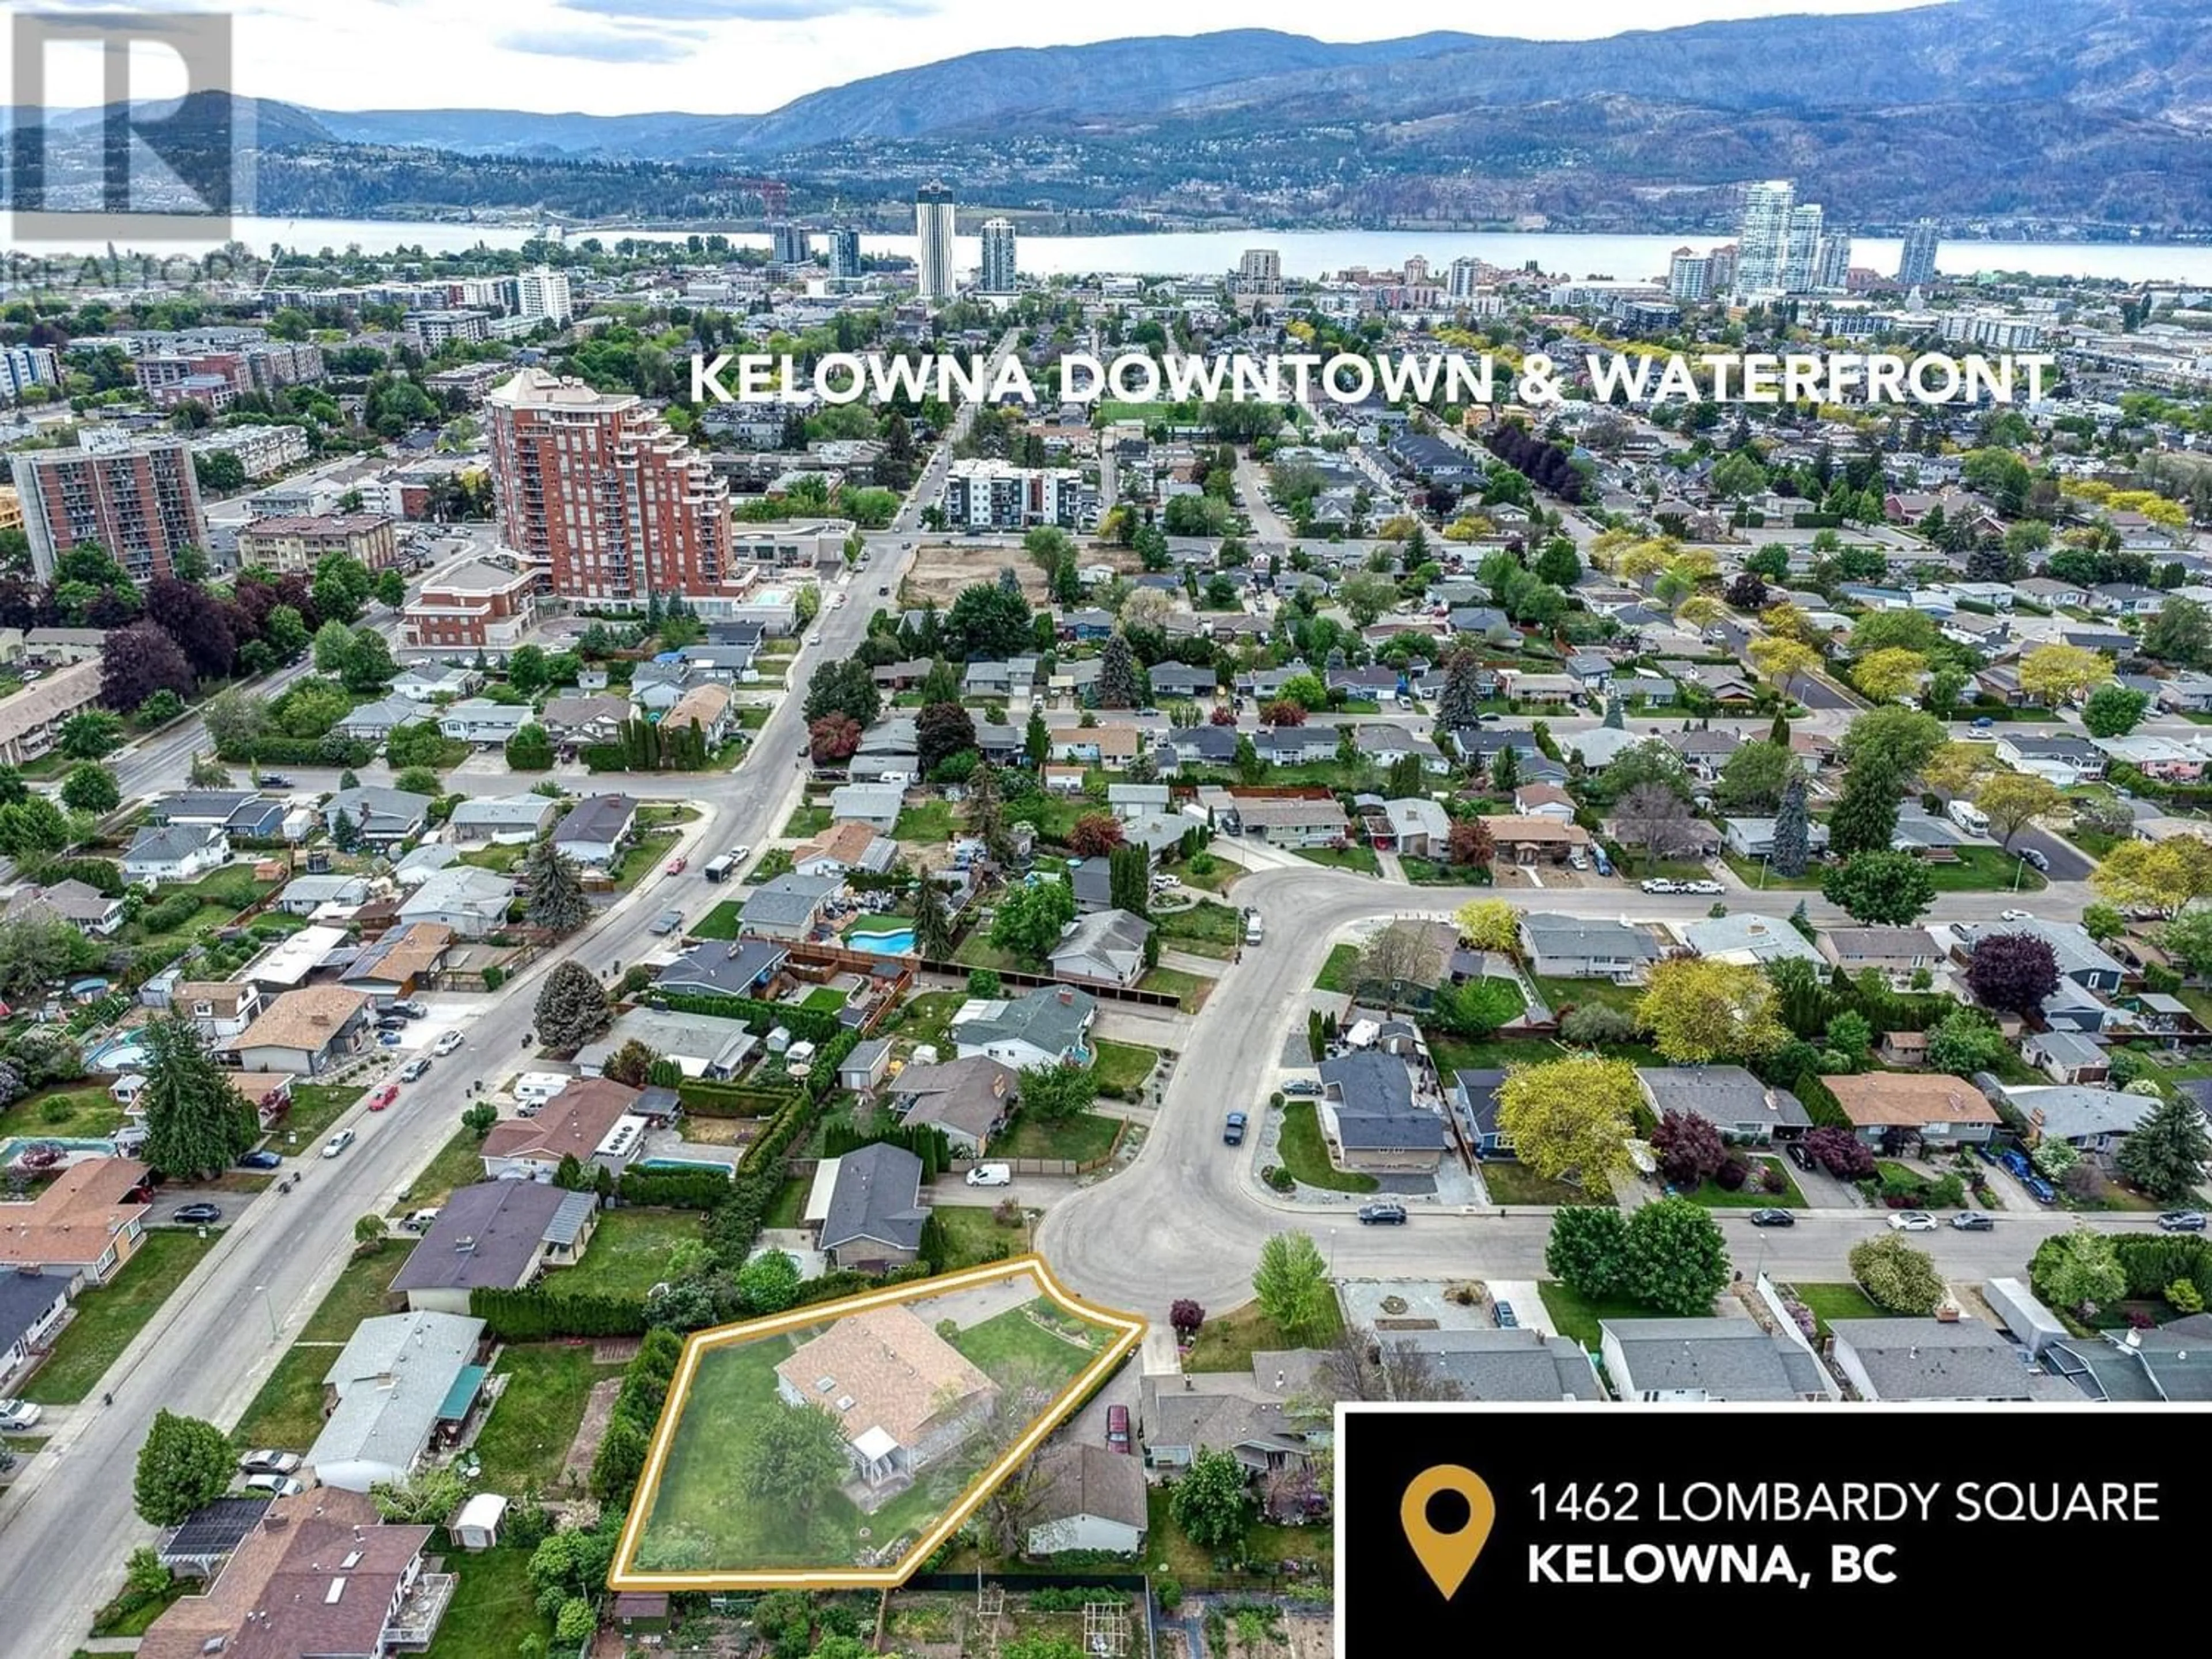 Lakeview for 1462 Lombardy Square, Kelowna British Columbia V1Y3S7